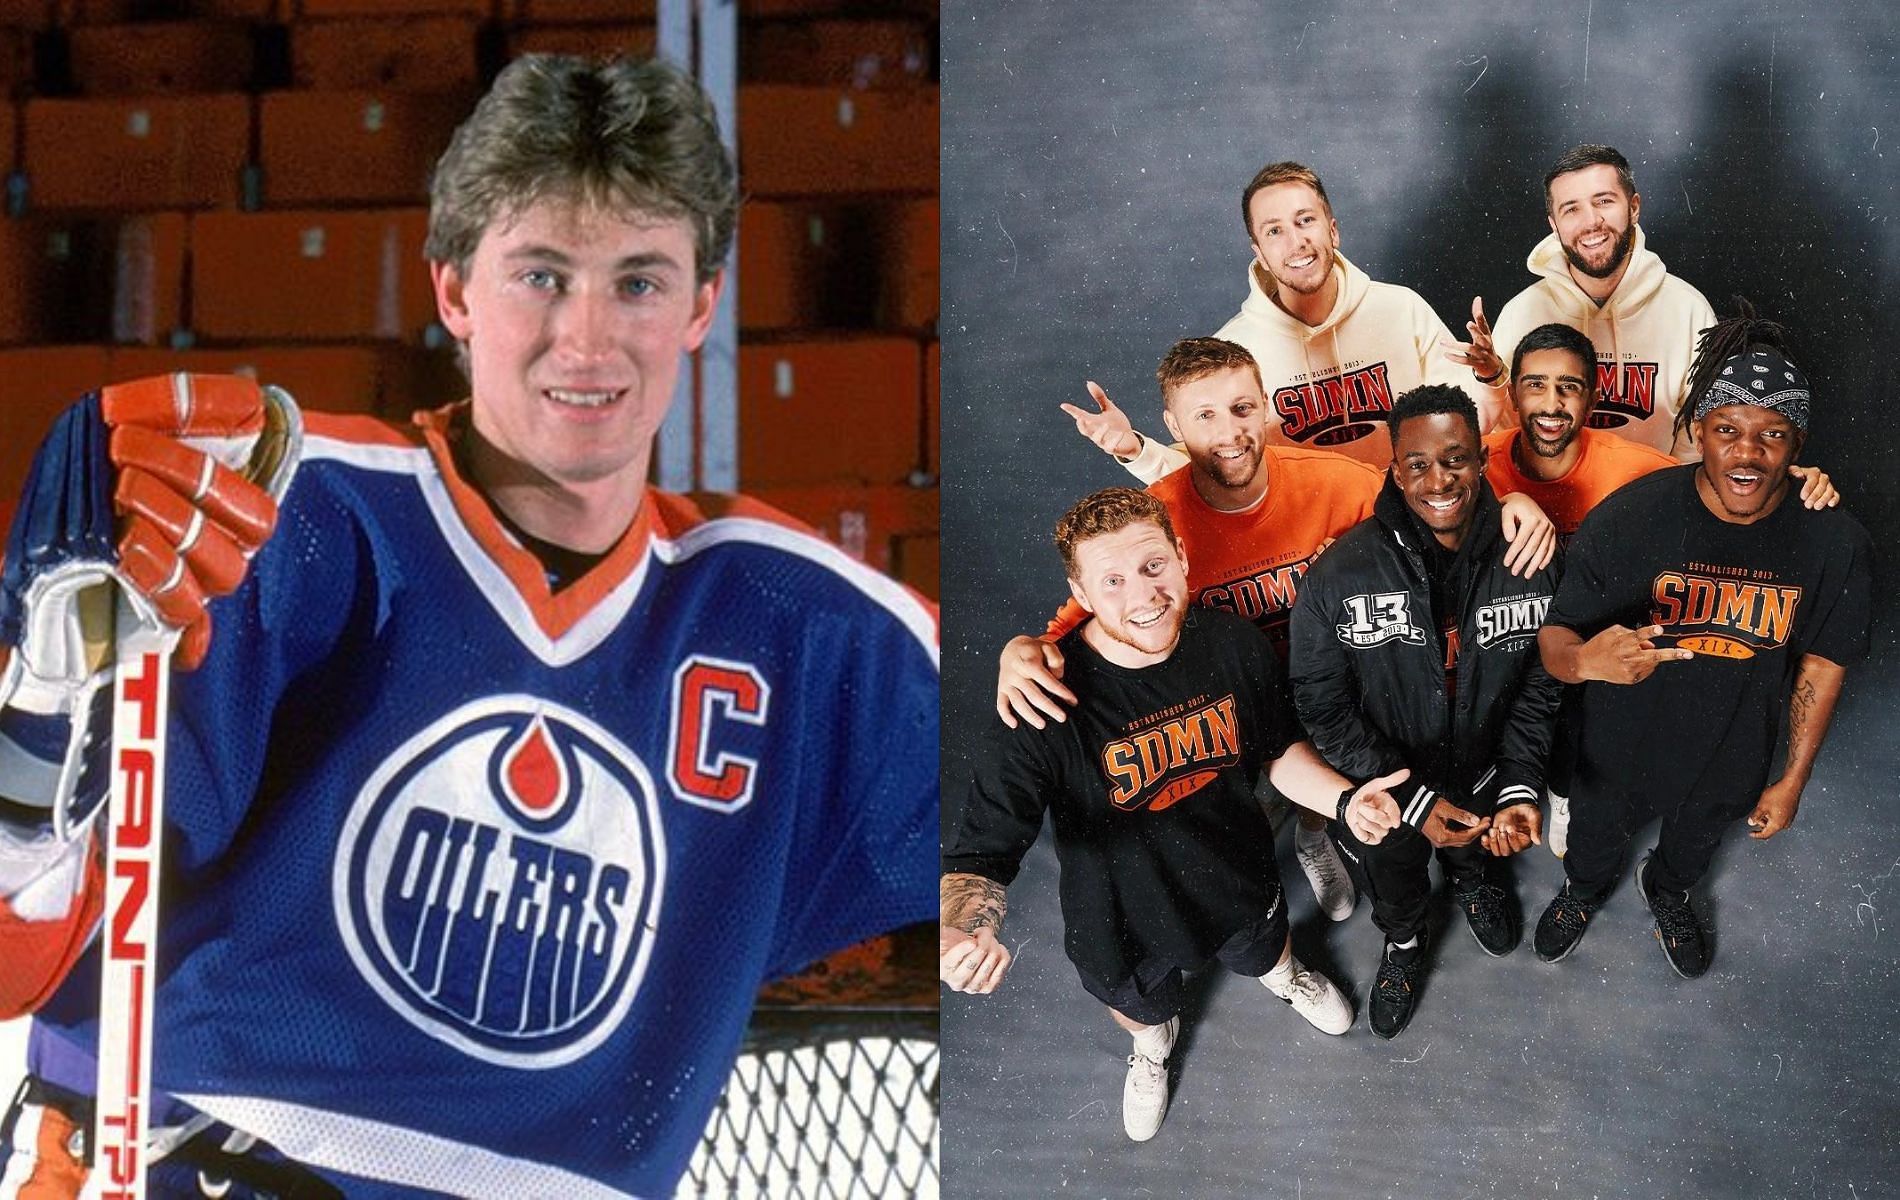 Wayne Gretzky gets featured on Sidemen, but YouTubers were unaware of Canadian hockey legend